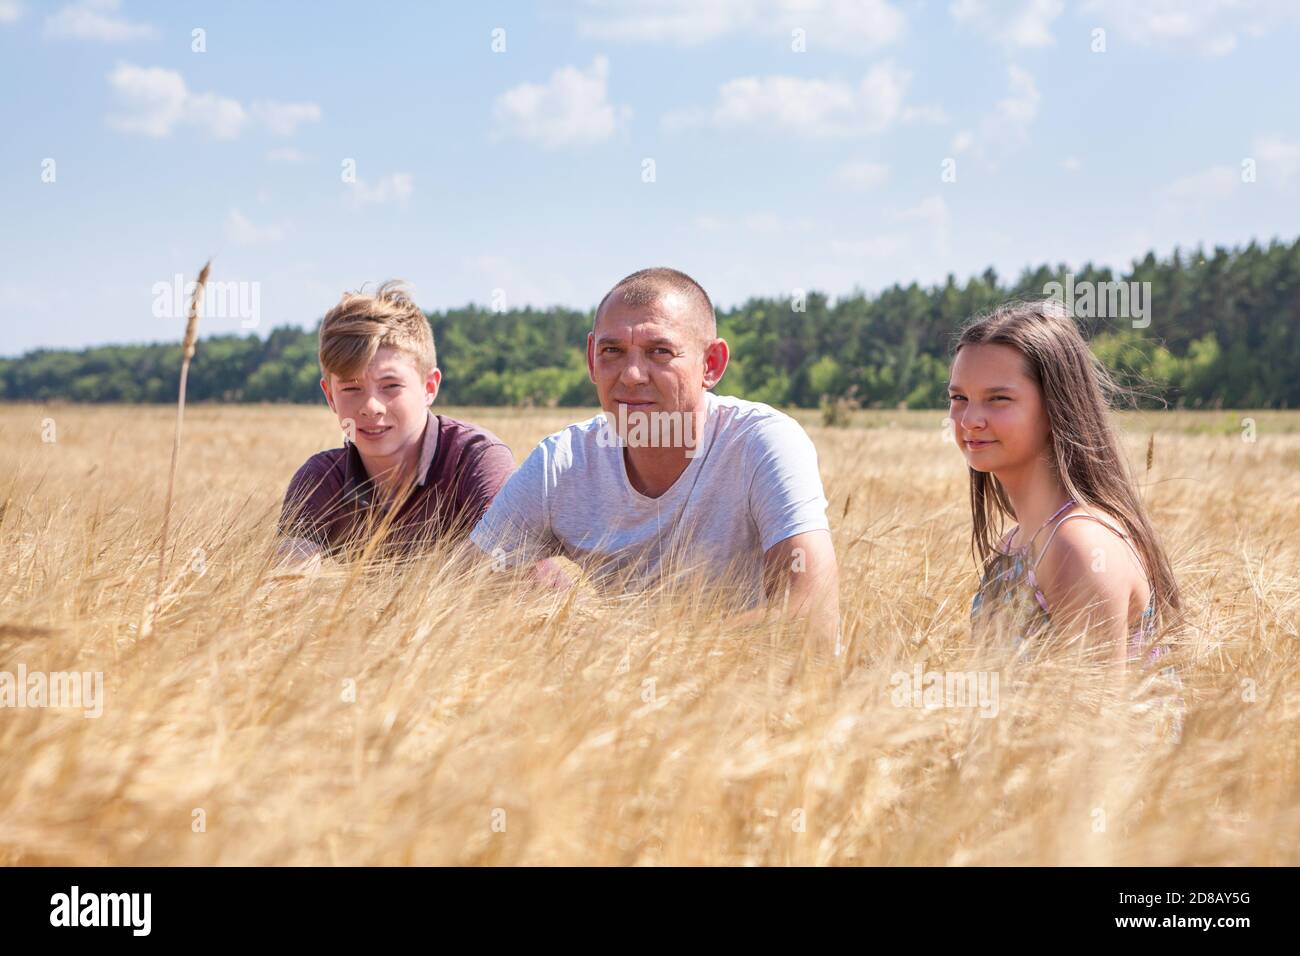 Single father with son and daughter sitting in golden wheat field at harvesting season Stock Photo